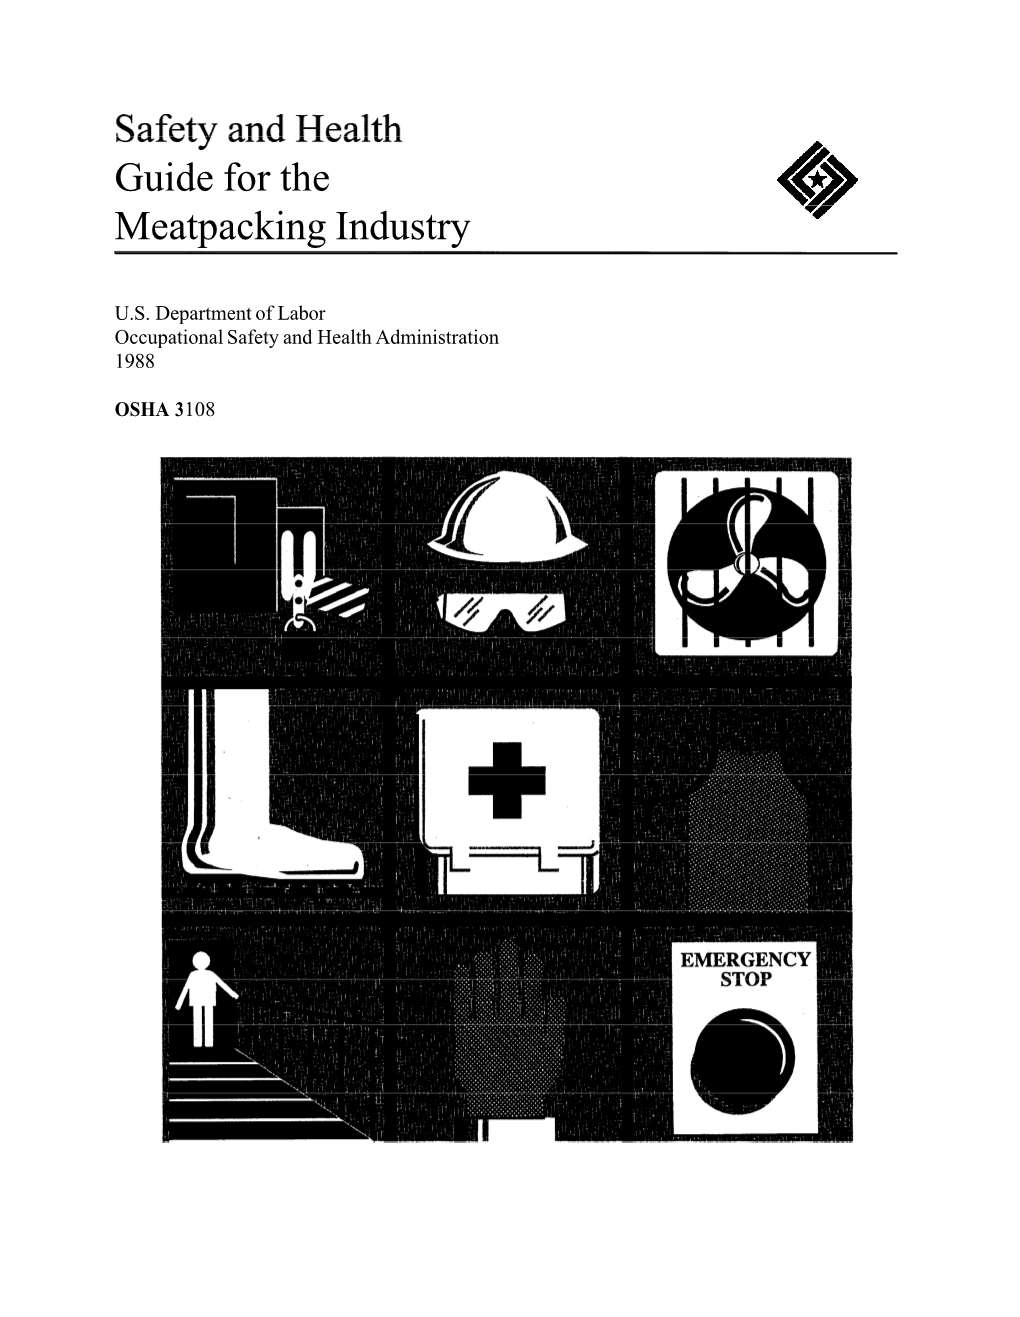 Safety and Health Guide for the Meatpacking Industry